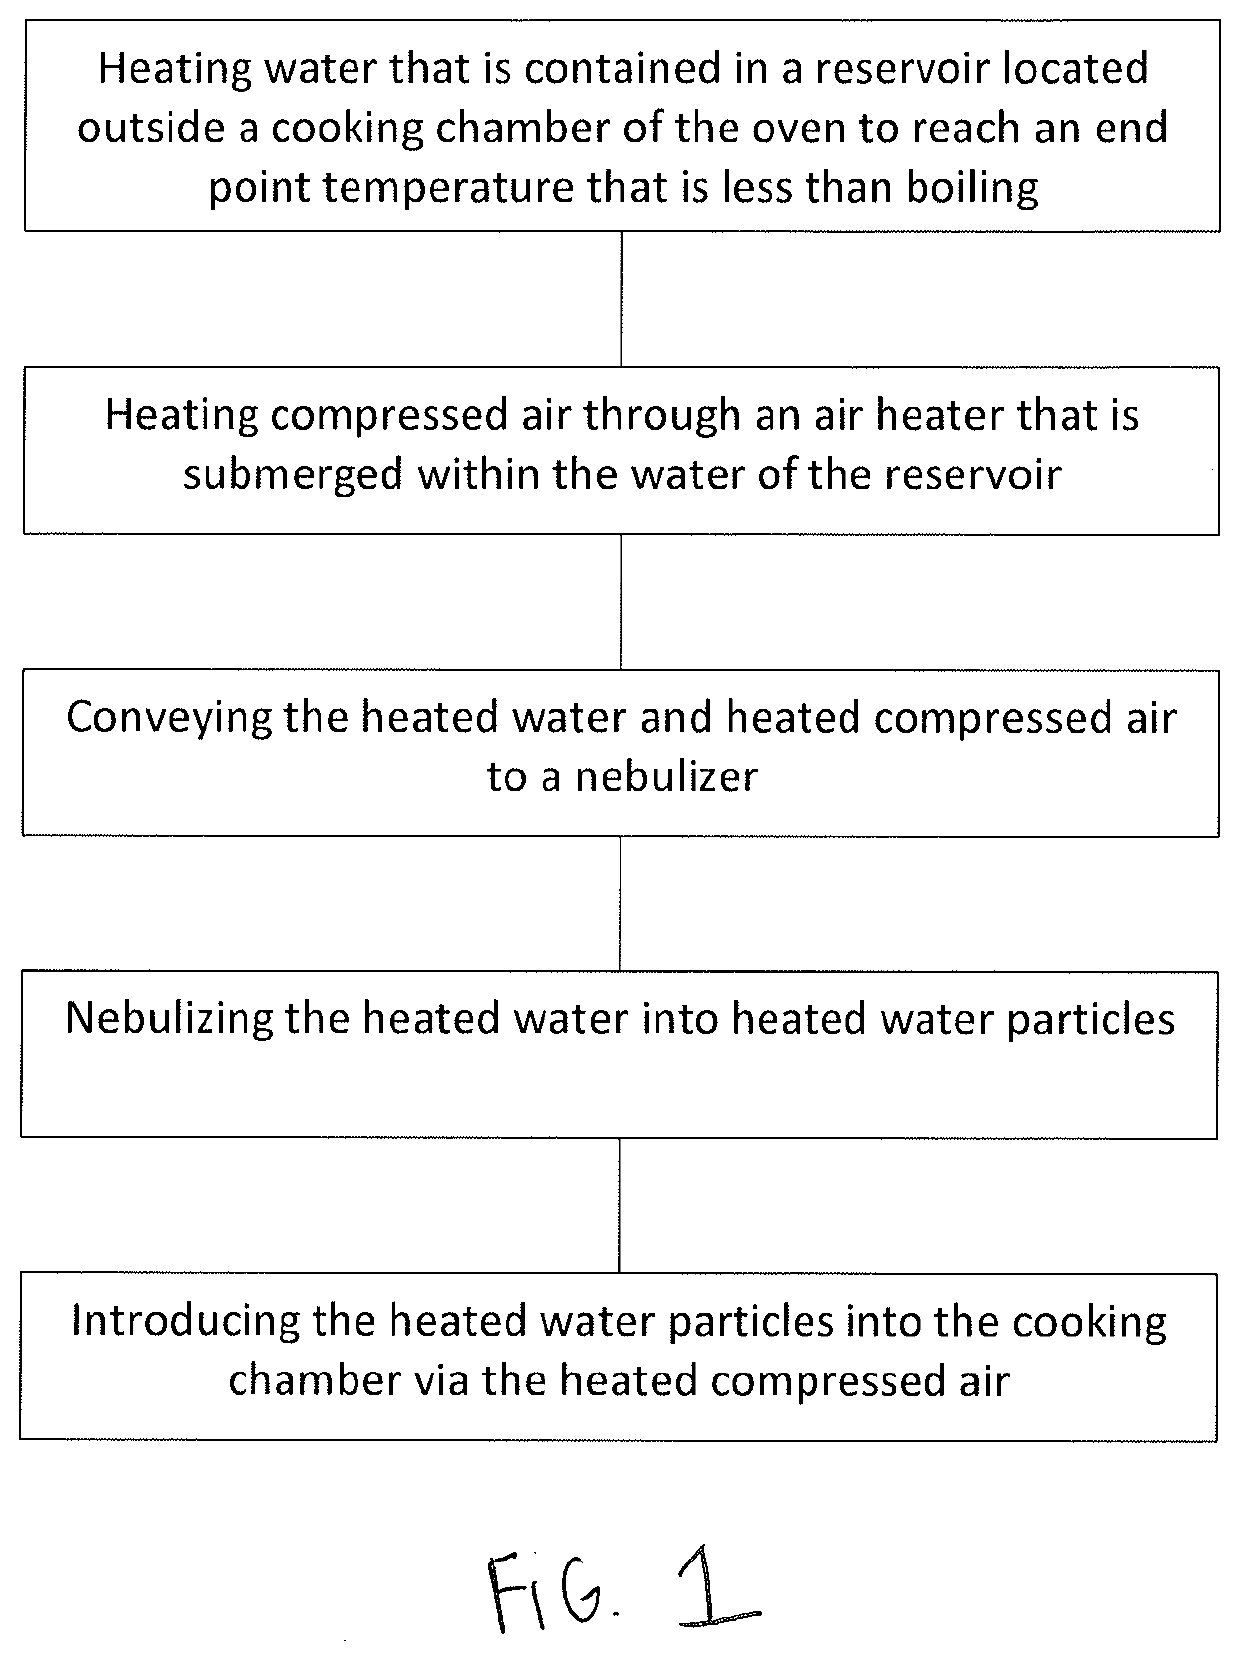 Process and apparatus for cooking utilizing nebulized water particles and air